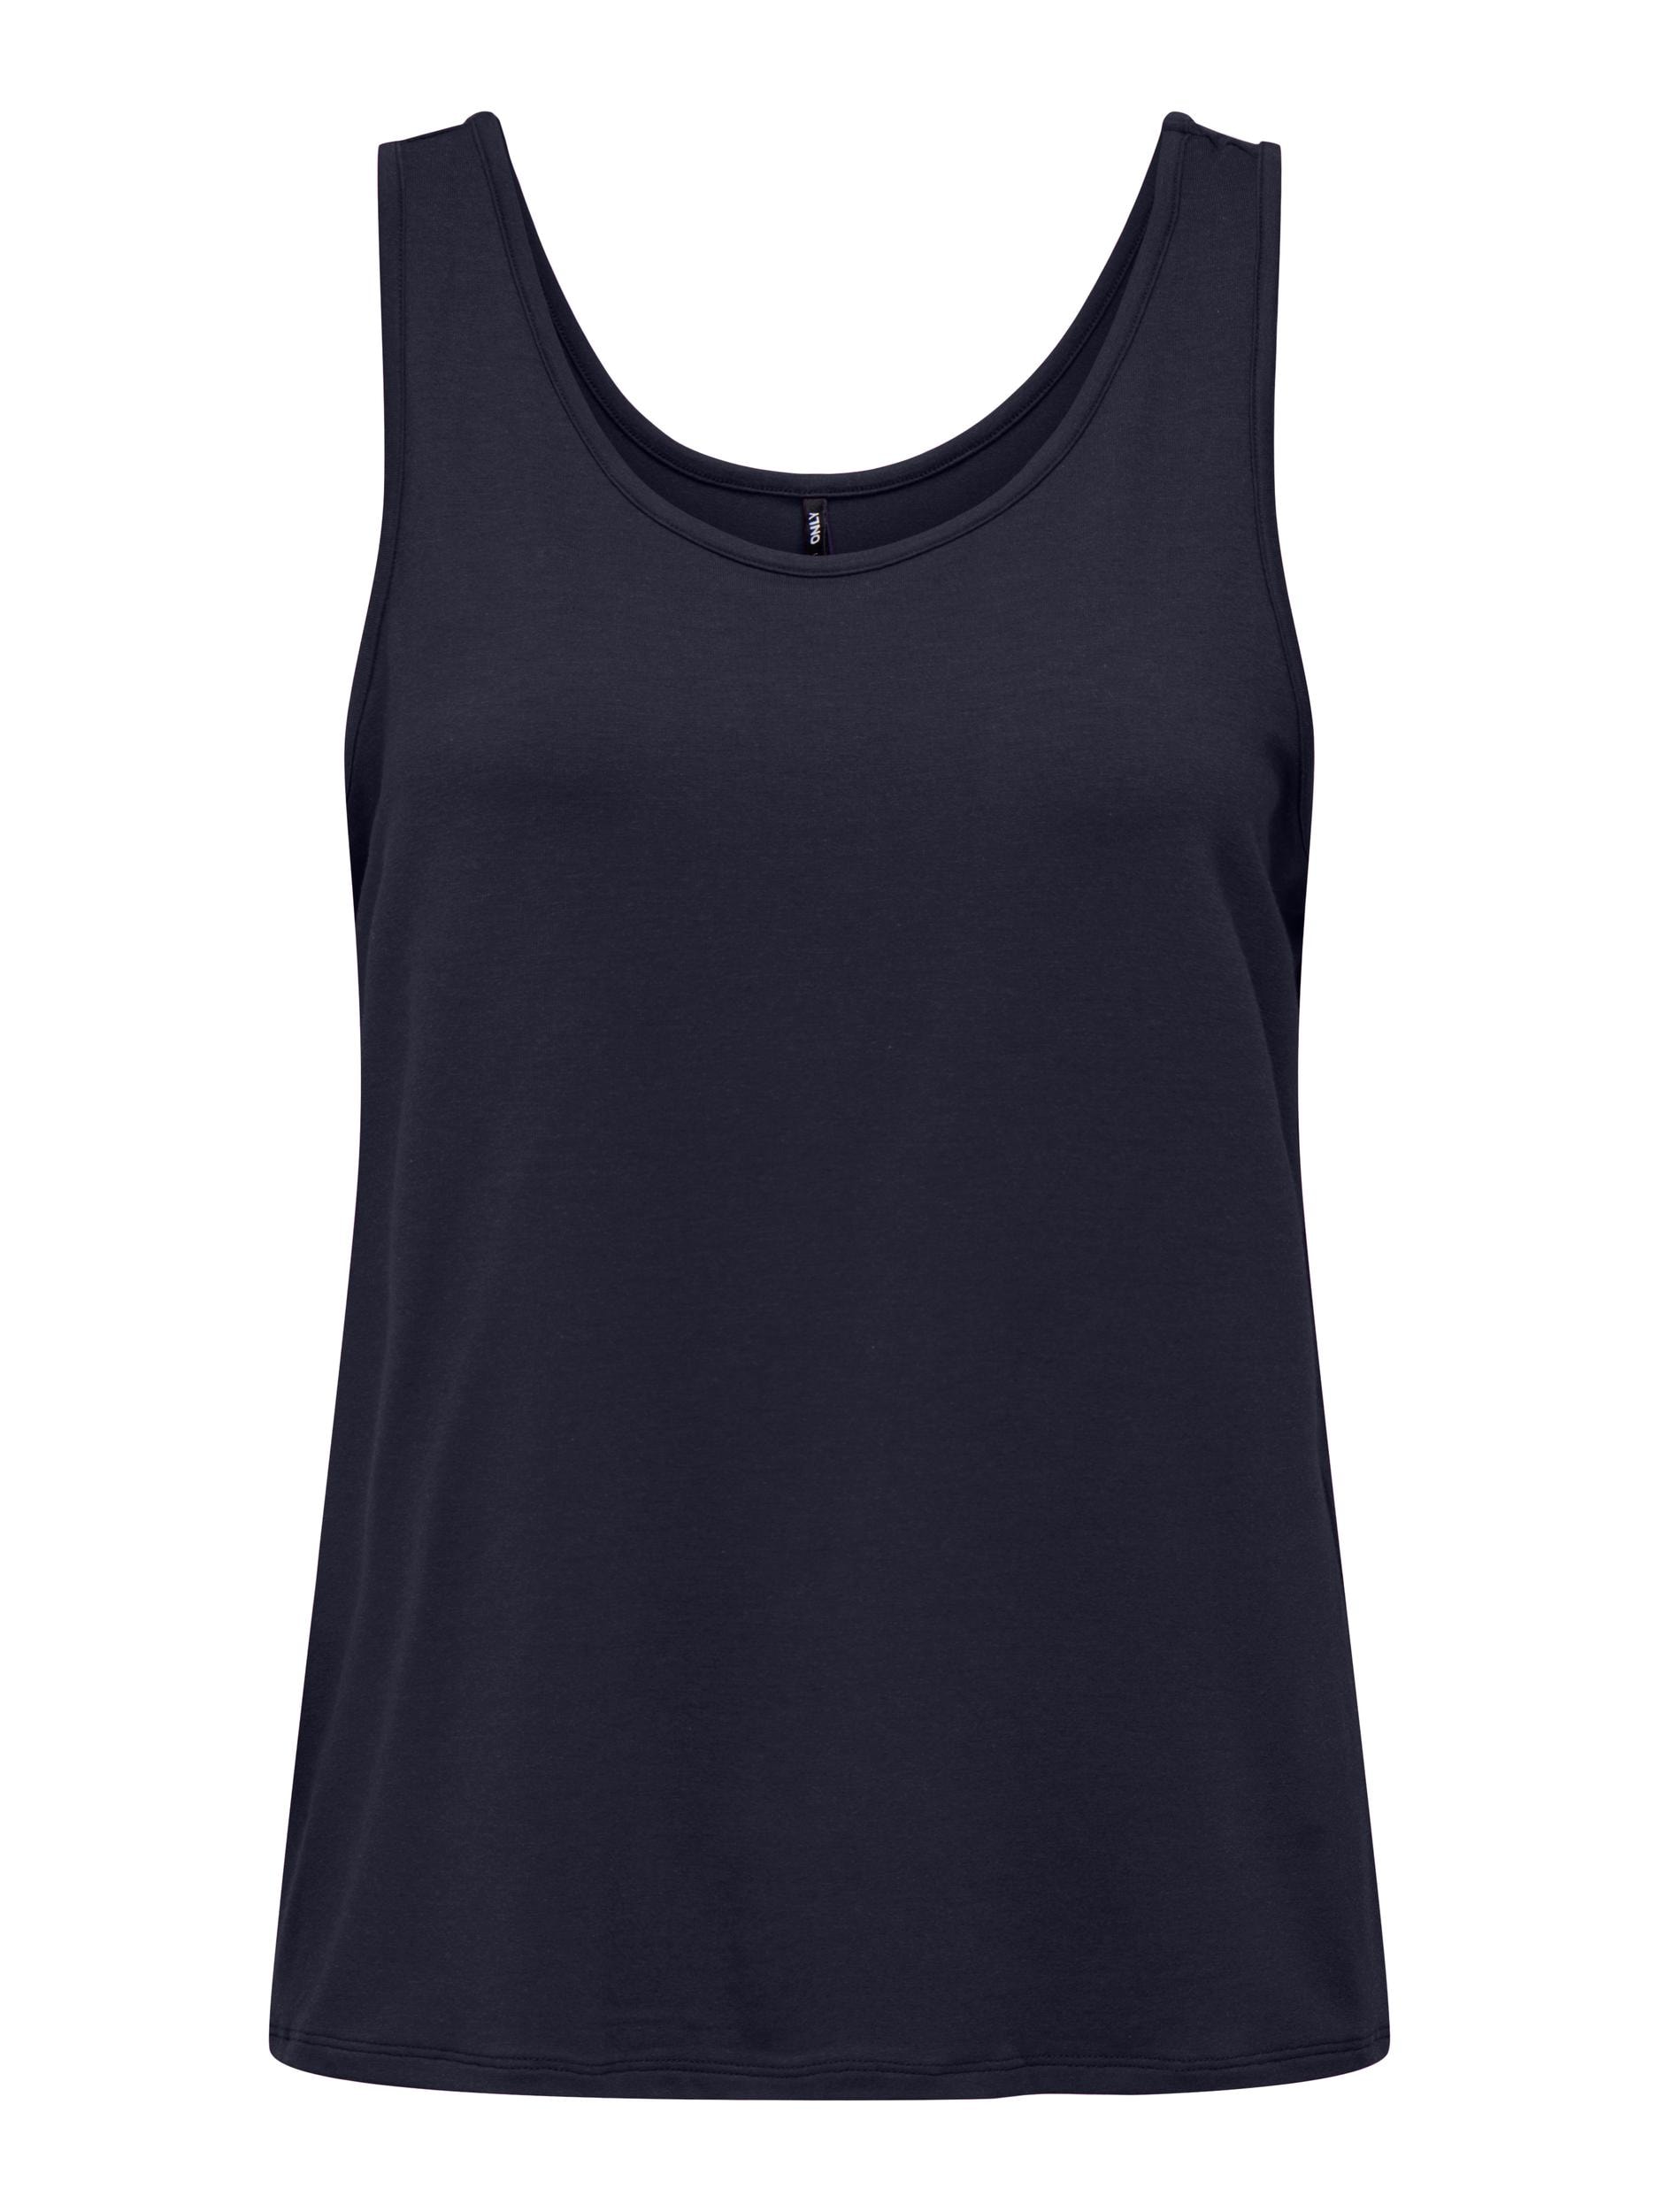 TOP Tanktop »ONLMOSTER NOOS« JRS ♕ ONLY S/L TANK bei